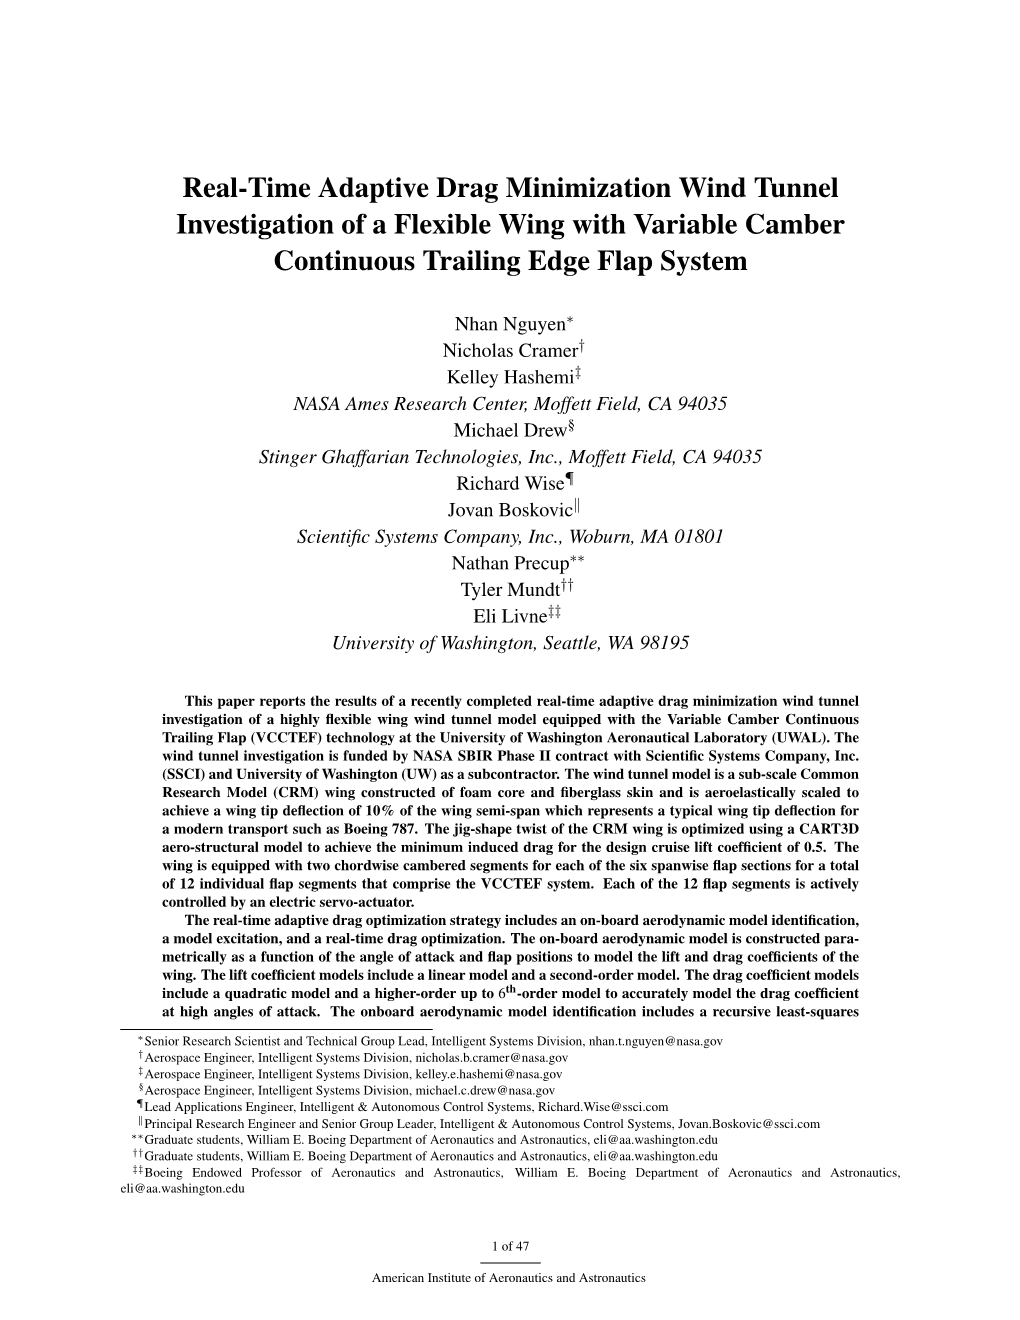 Real-Time Adaptive Drag Minimization Wind Tunnel Investigation of a Flexible Wing with Variable Camber Continuous Trailing Edge Flap System